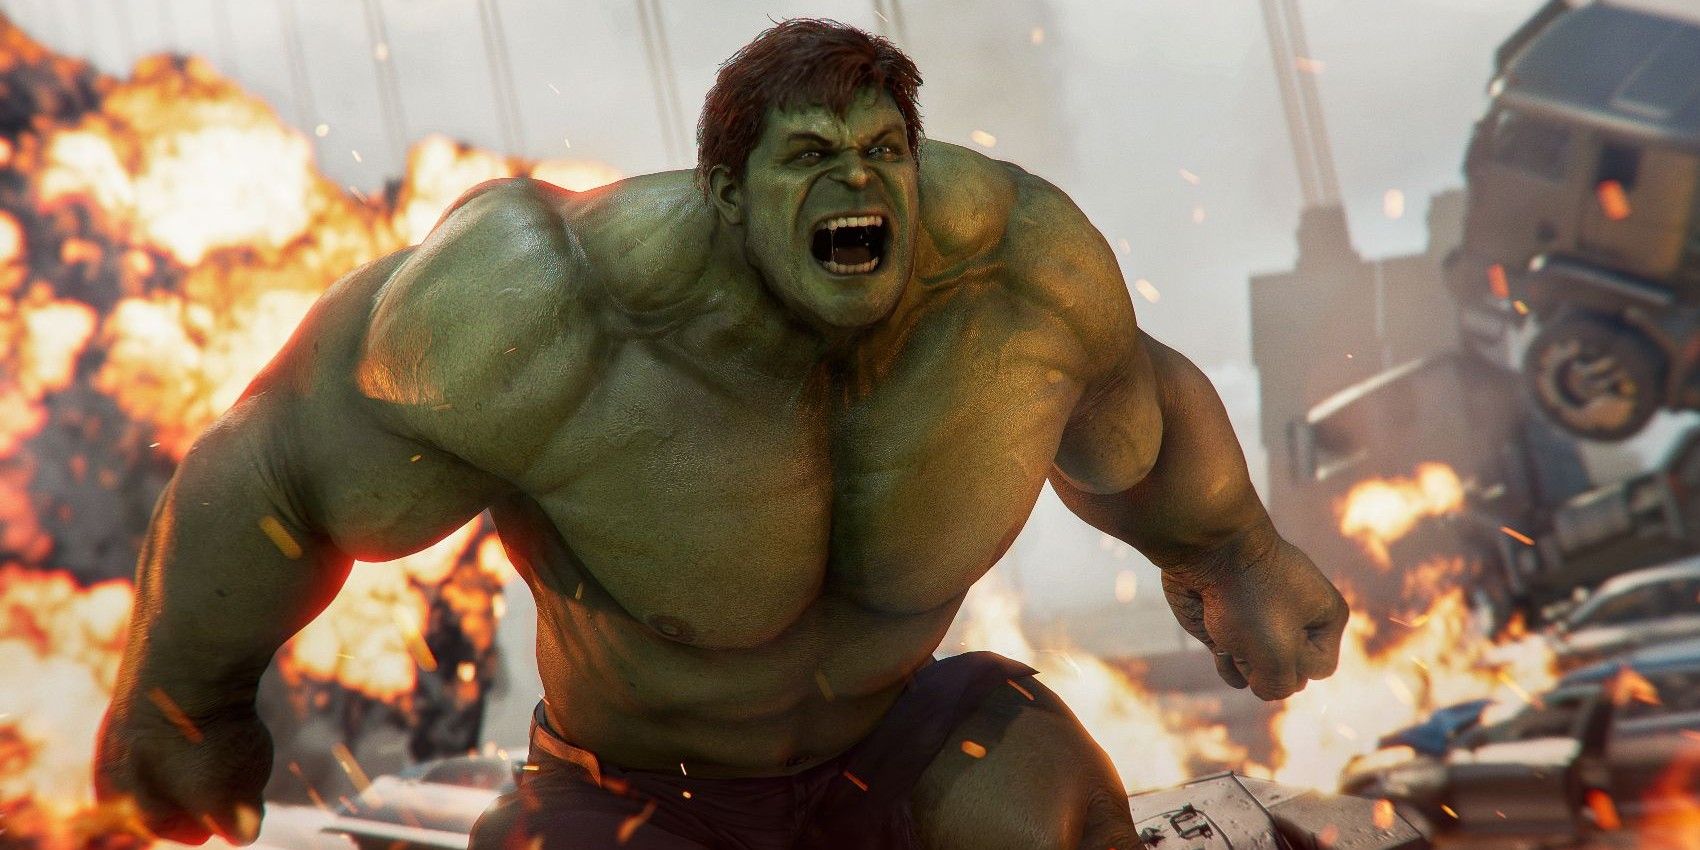 Marvel’s Avengers Pay-To-Win Items Were A Slap In The Face